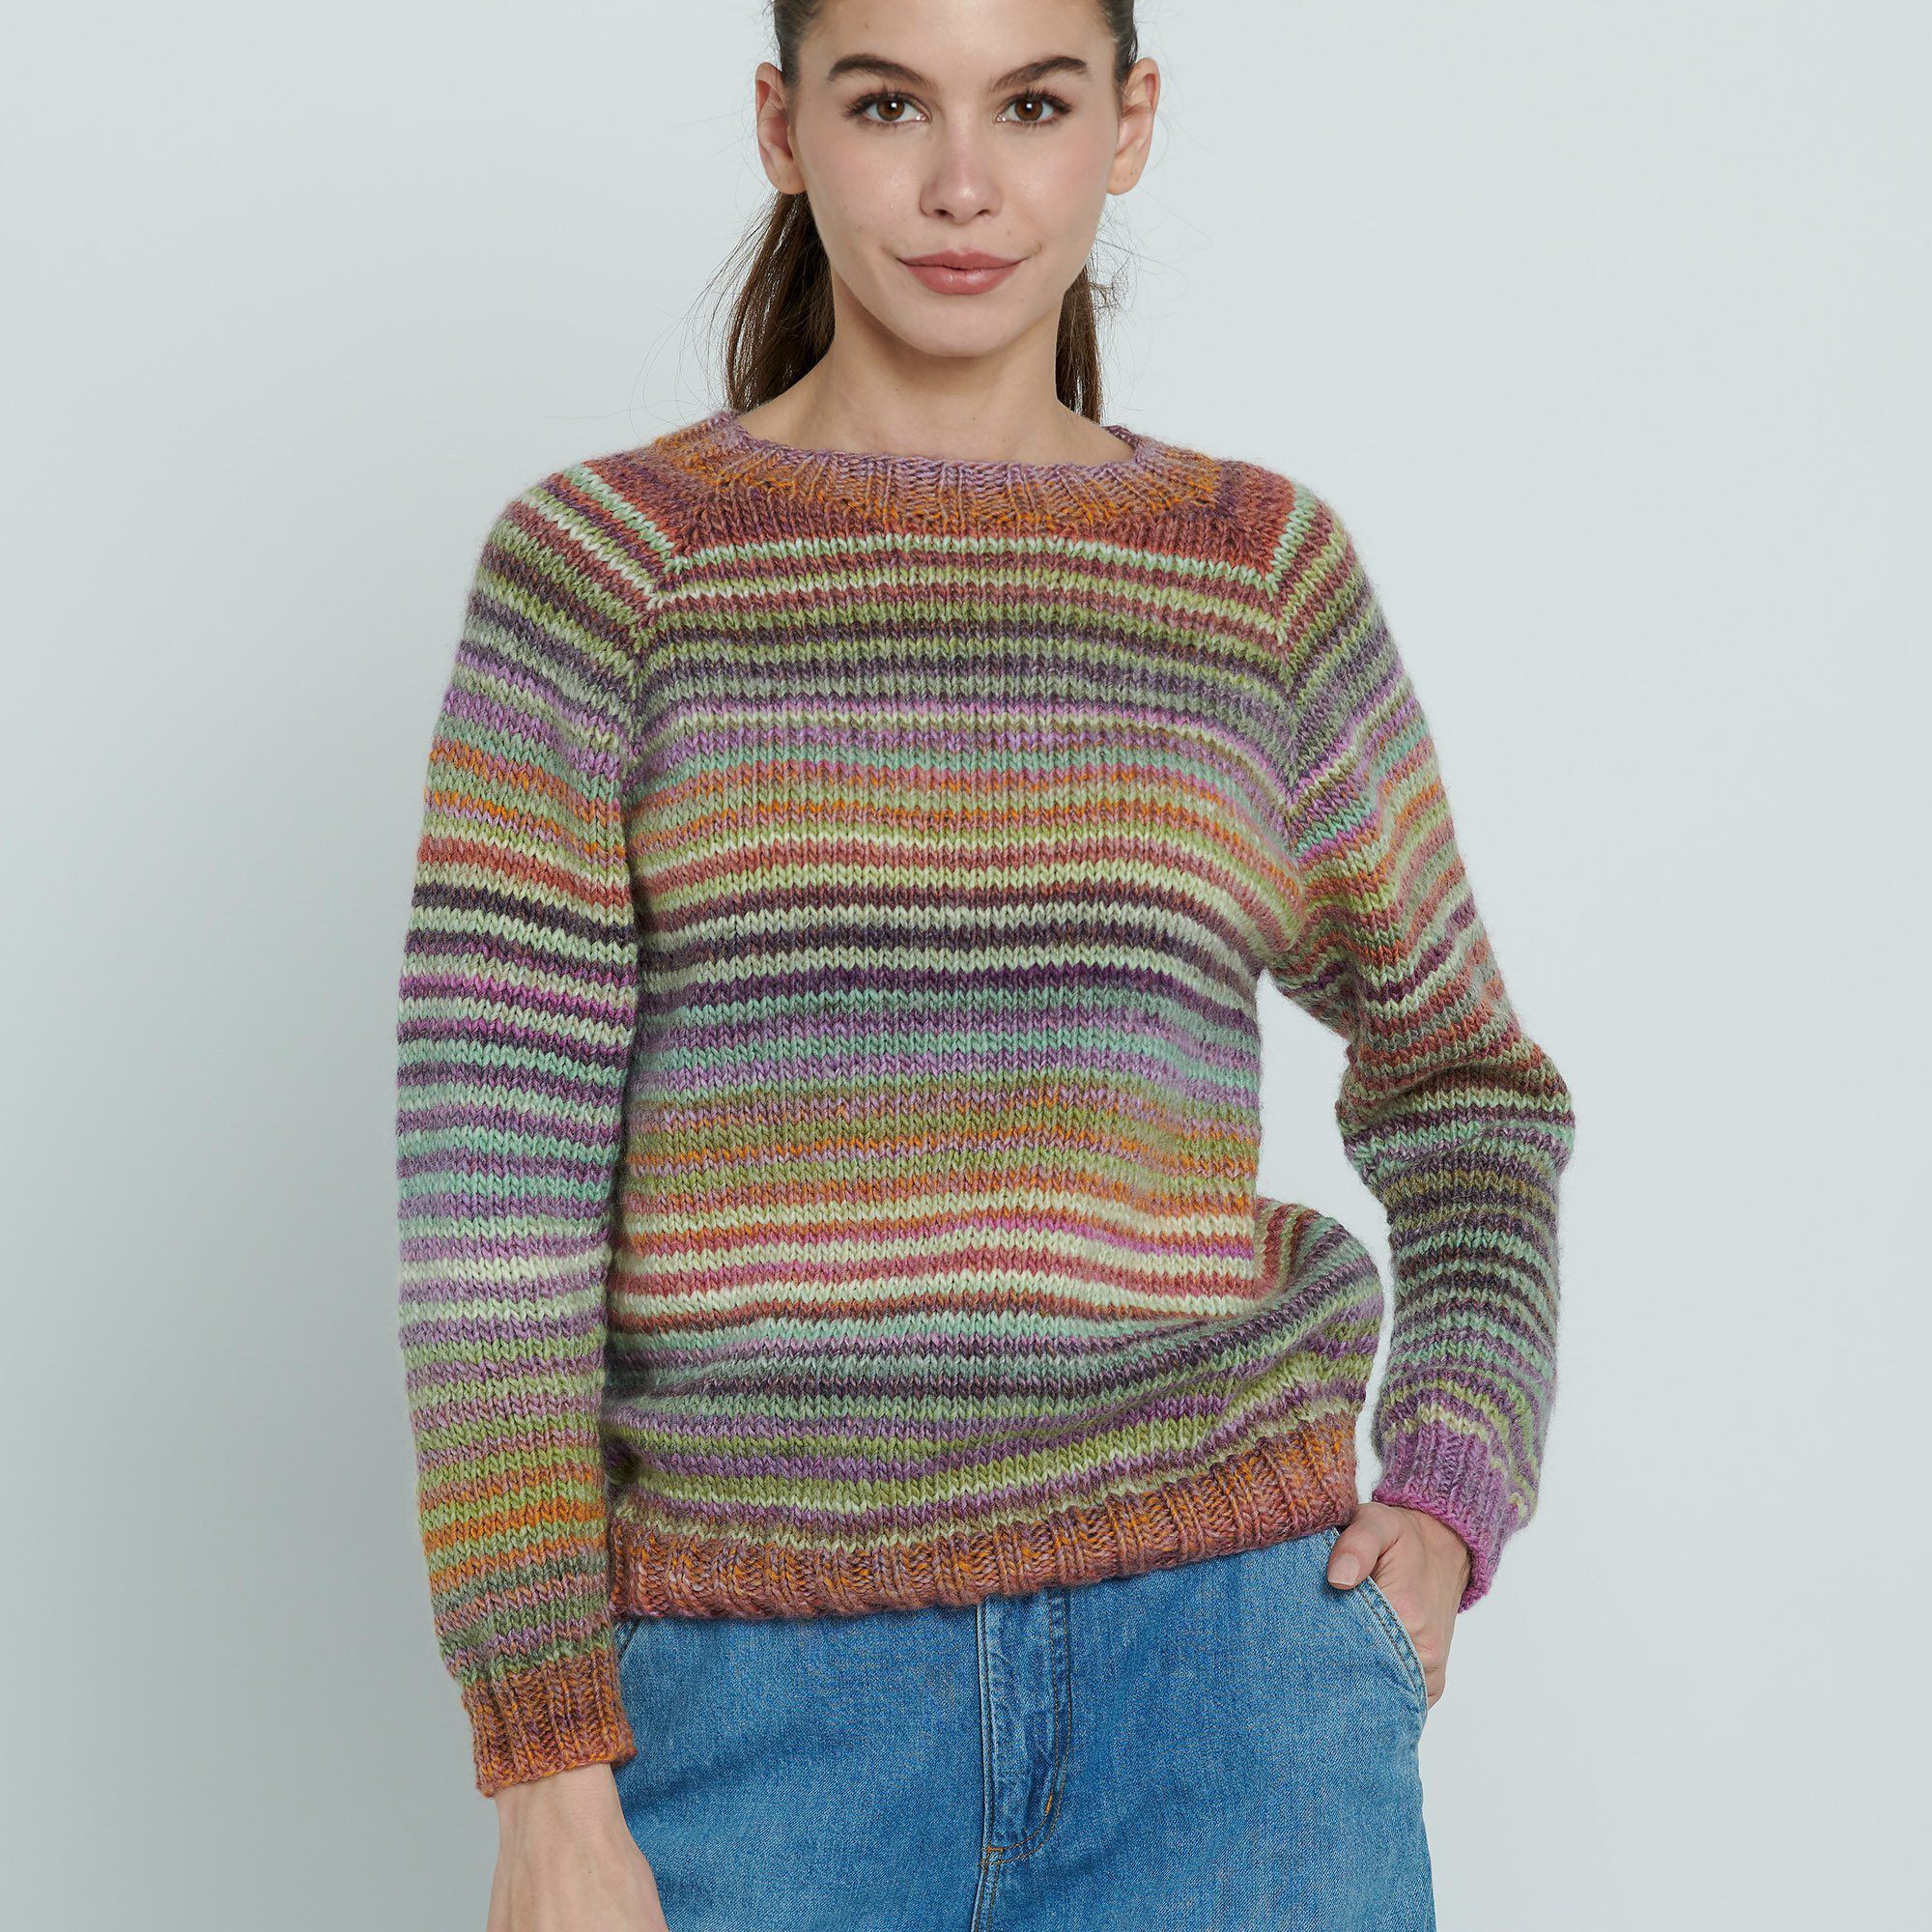 Knitting Patterns Galore - Striped Top Down Sweater